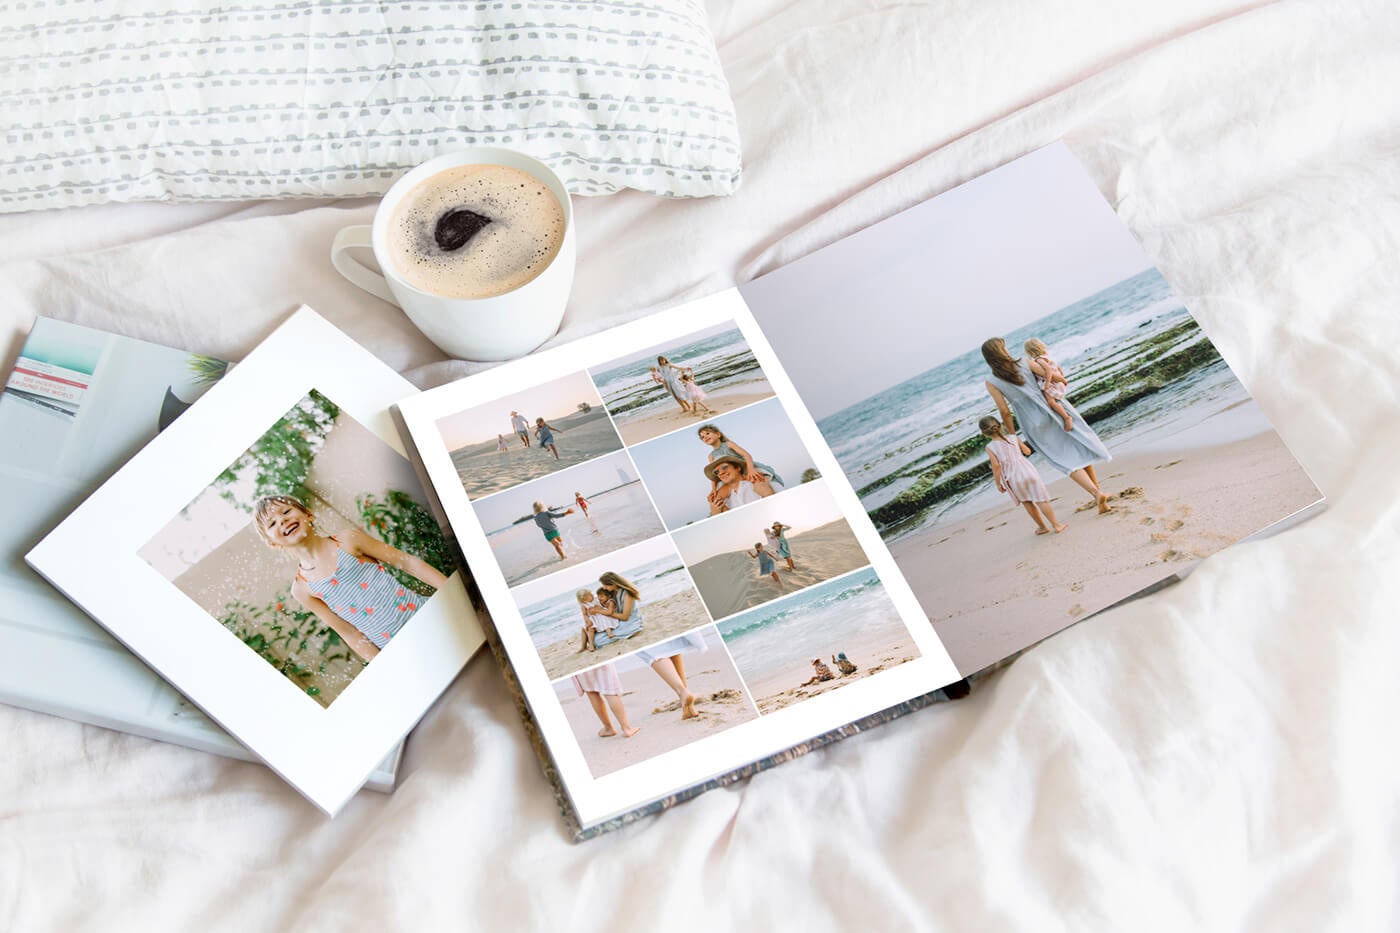 photo book by printique on bed showing familly on beach